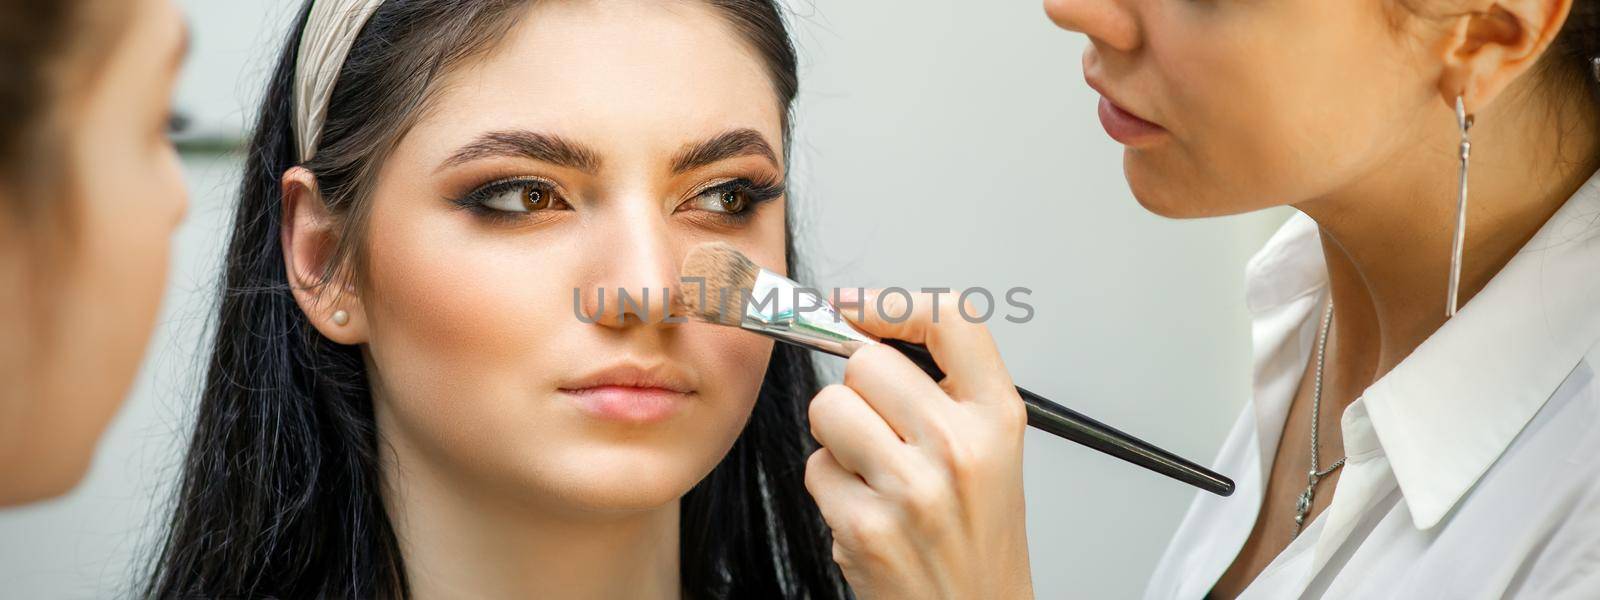 Closeup portrait of a woman applying dry cosmetic tonal foundation on the face using a makeup brush. Makeup detail